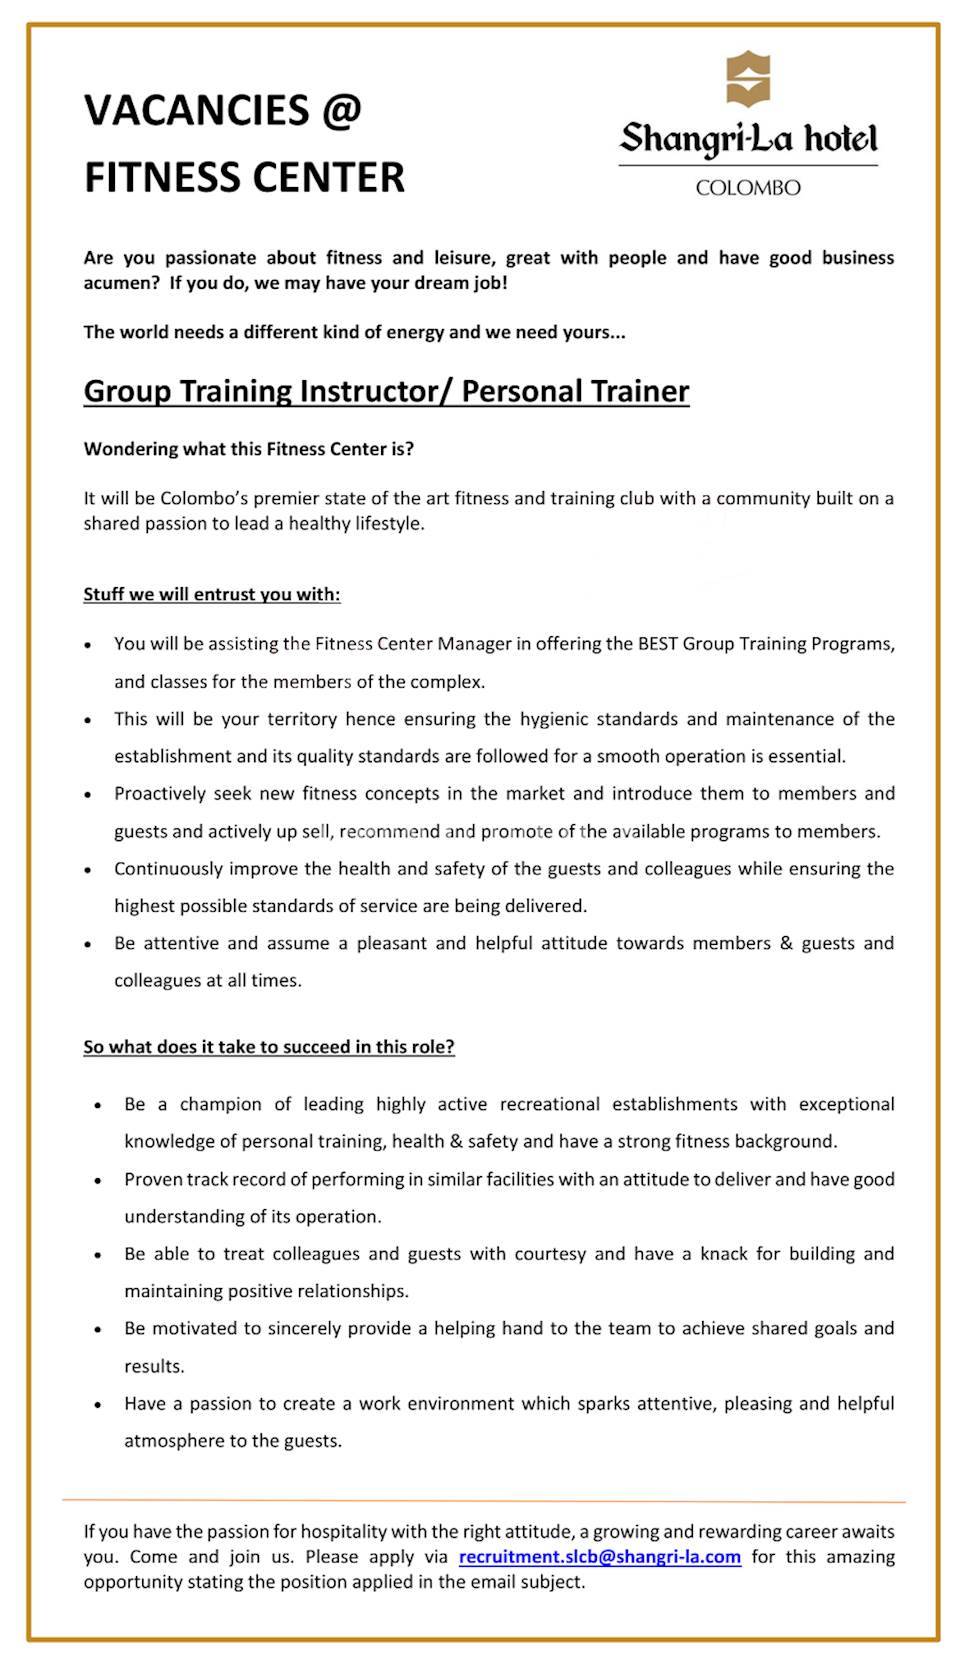 Group Training Instructor / Personal Trainer